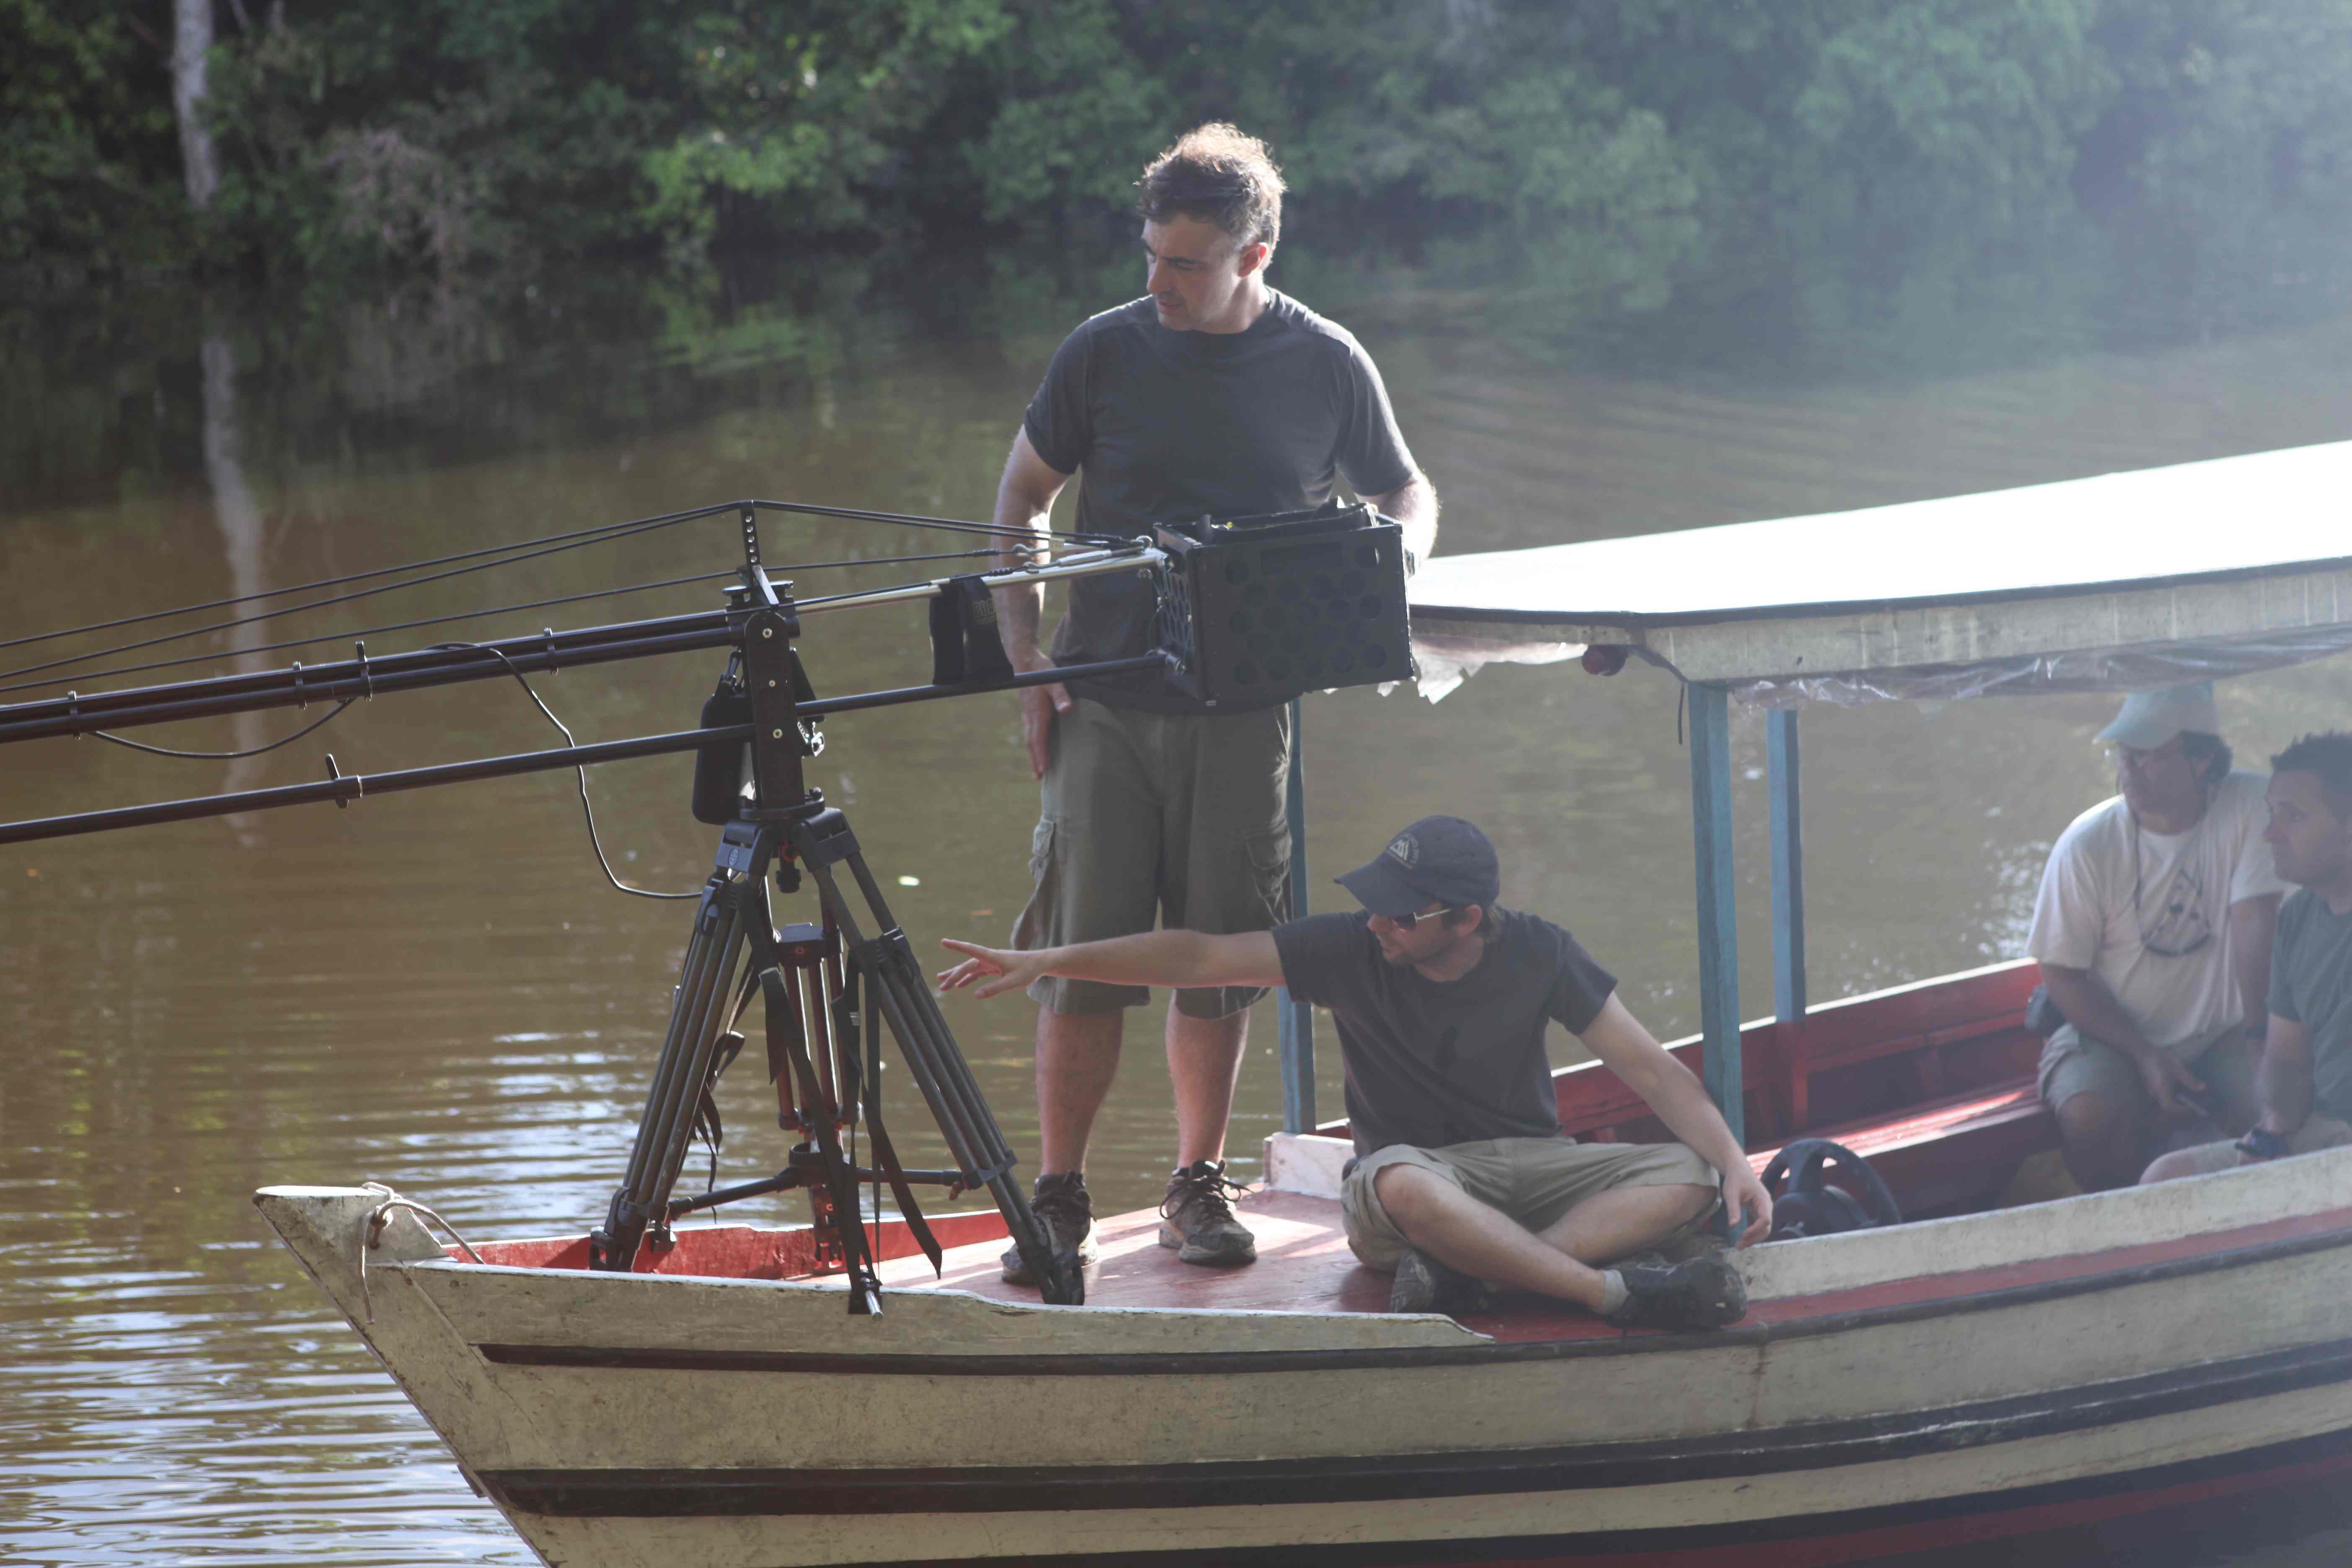 In the Amazon shooting Beyond Disaster